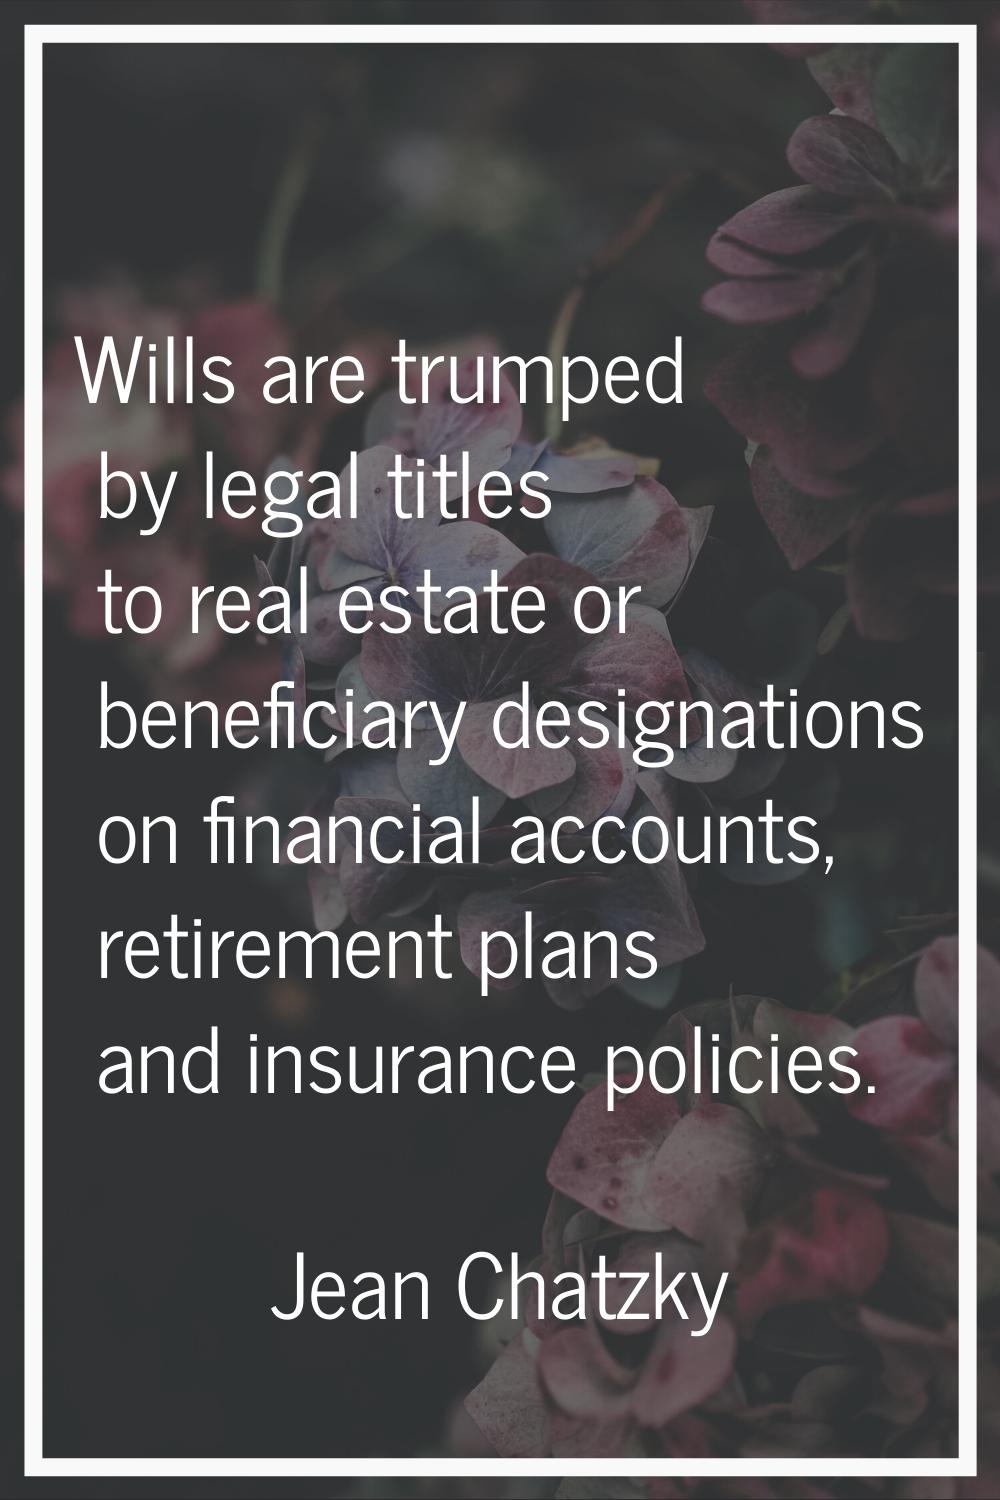 Wills are trumped by legal titles to real estate or beneficiary designations on financial accounts,